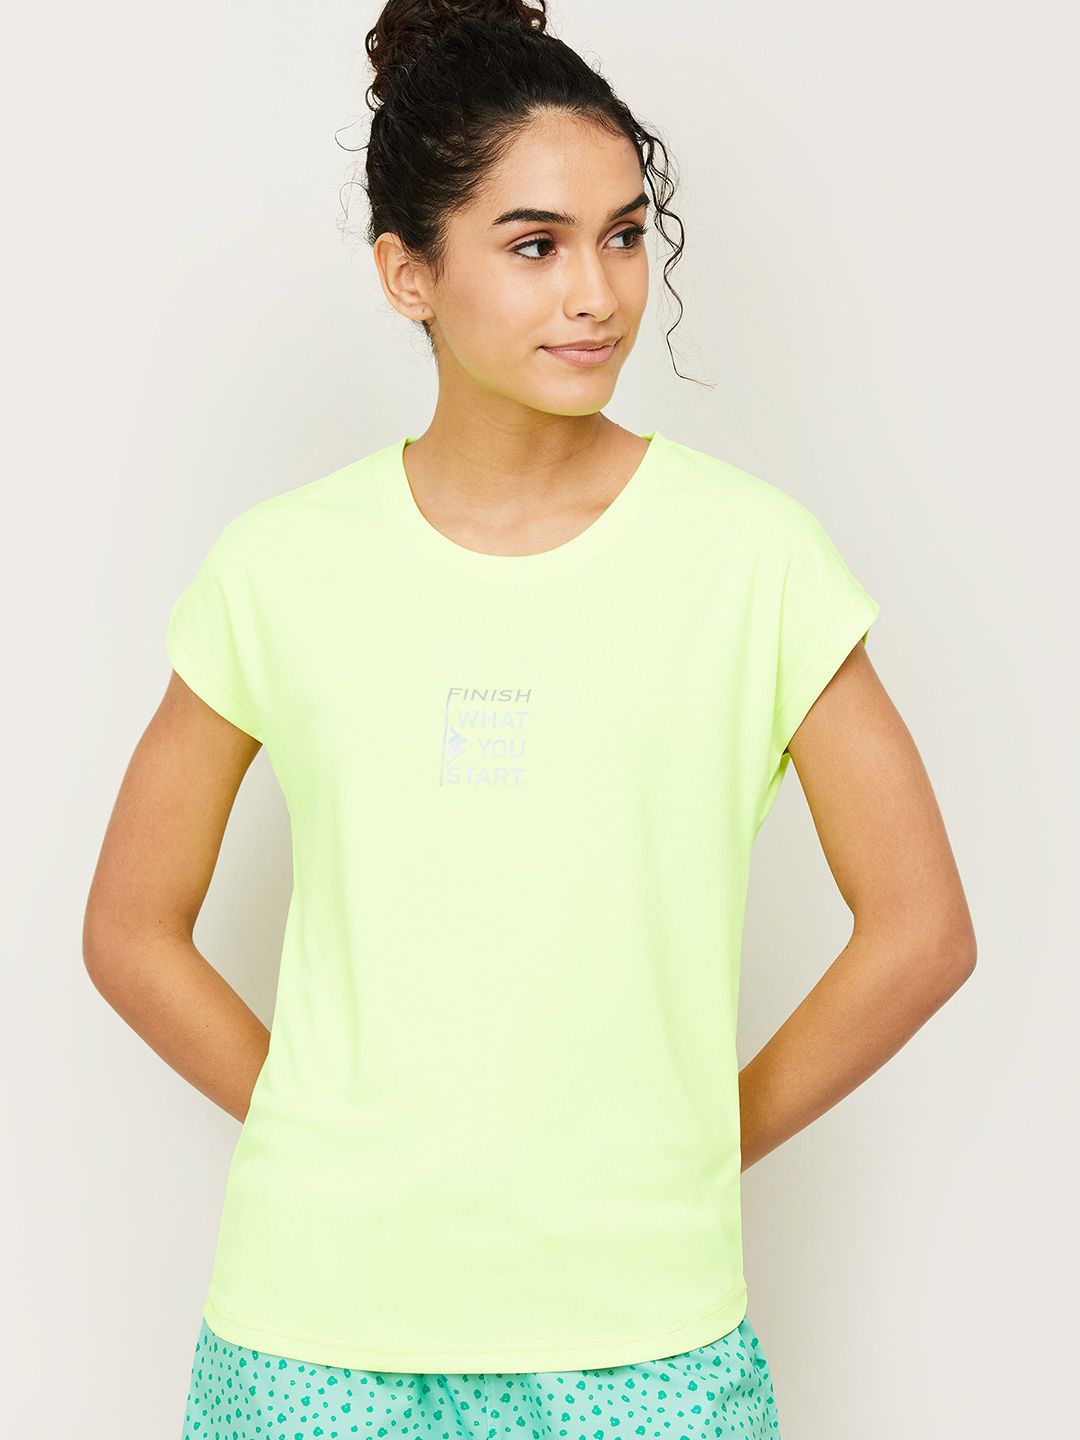 Kappa Women Fluorescent Green Typography Printed Sports T-shirt Price in India